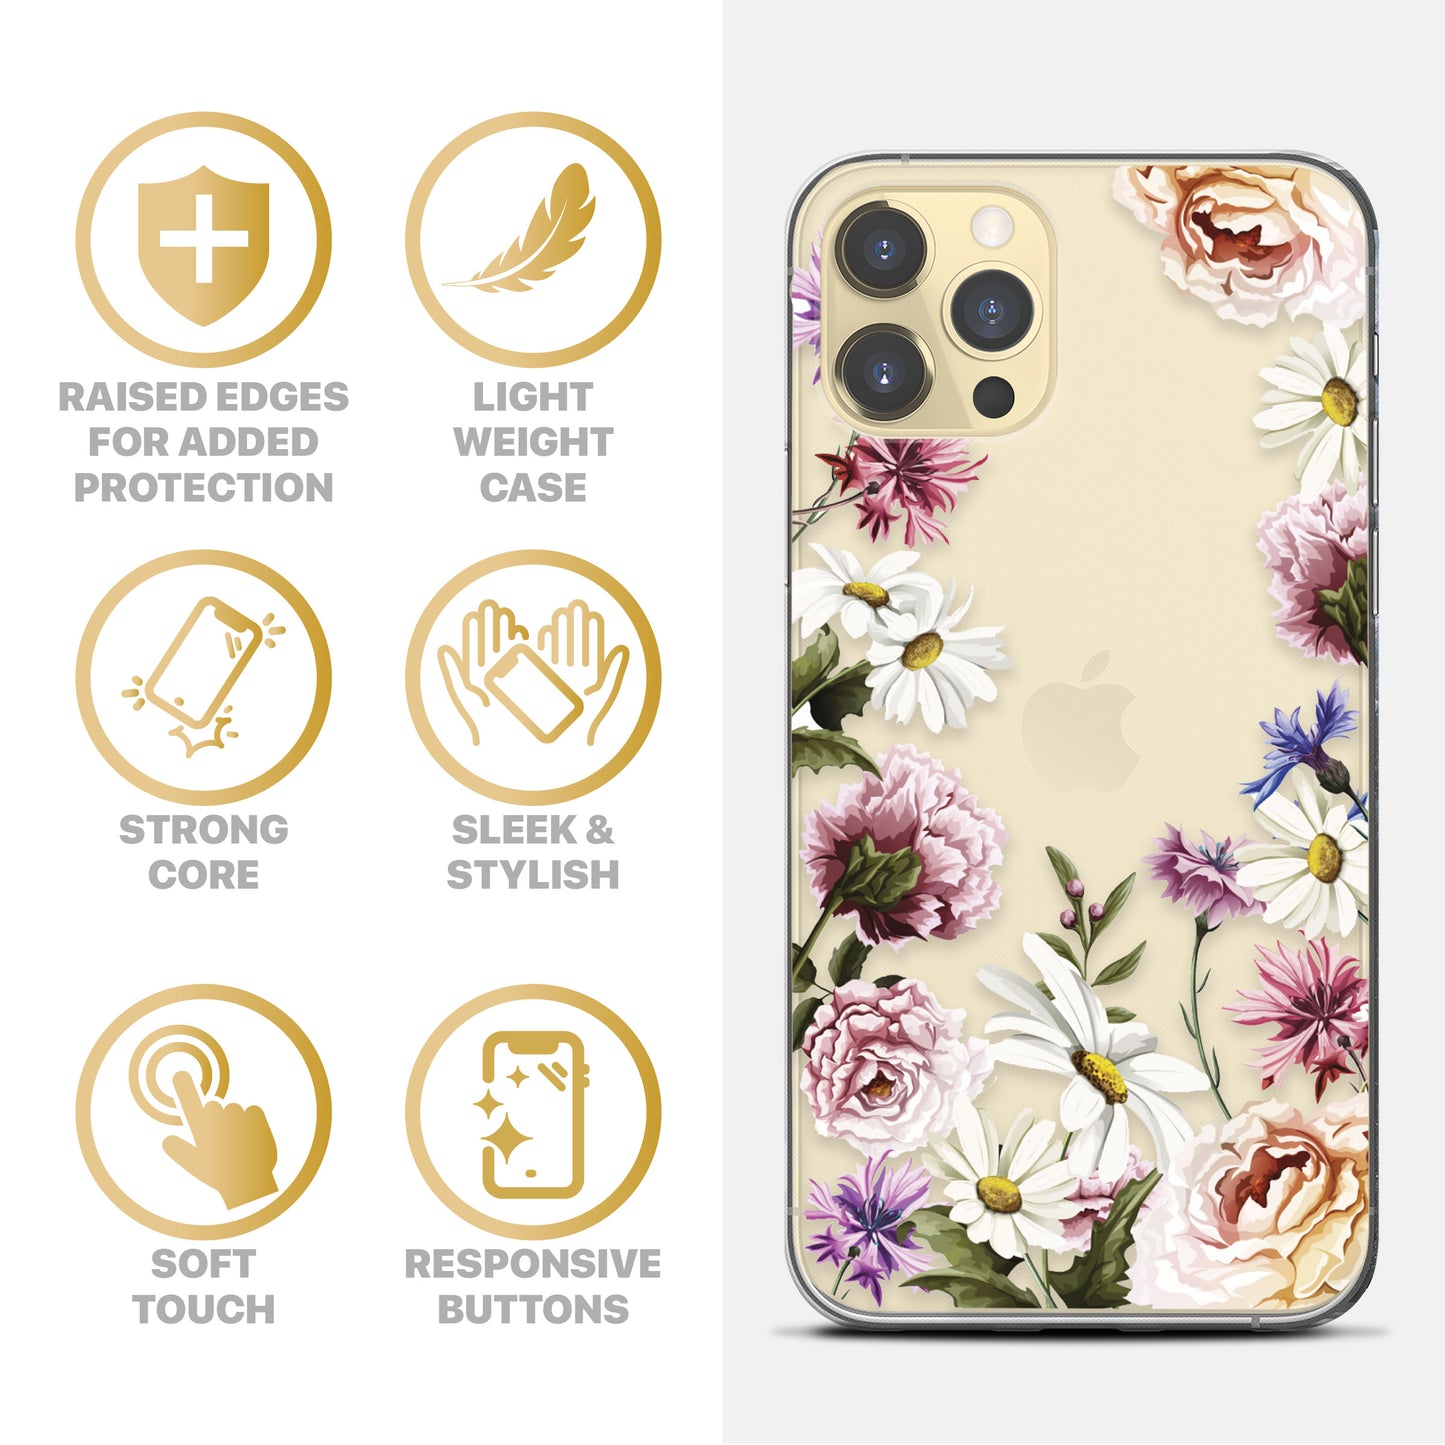 TPU Case Clear case with (Carnation Flowers) Design for iPhone & Samsung Phones